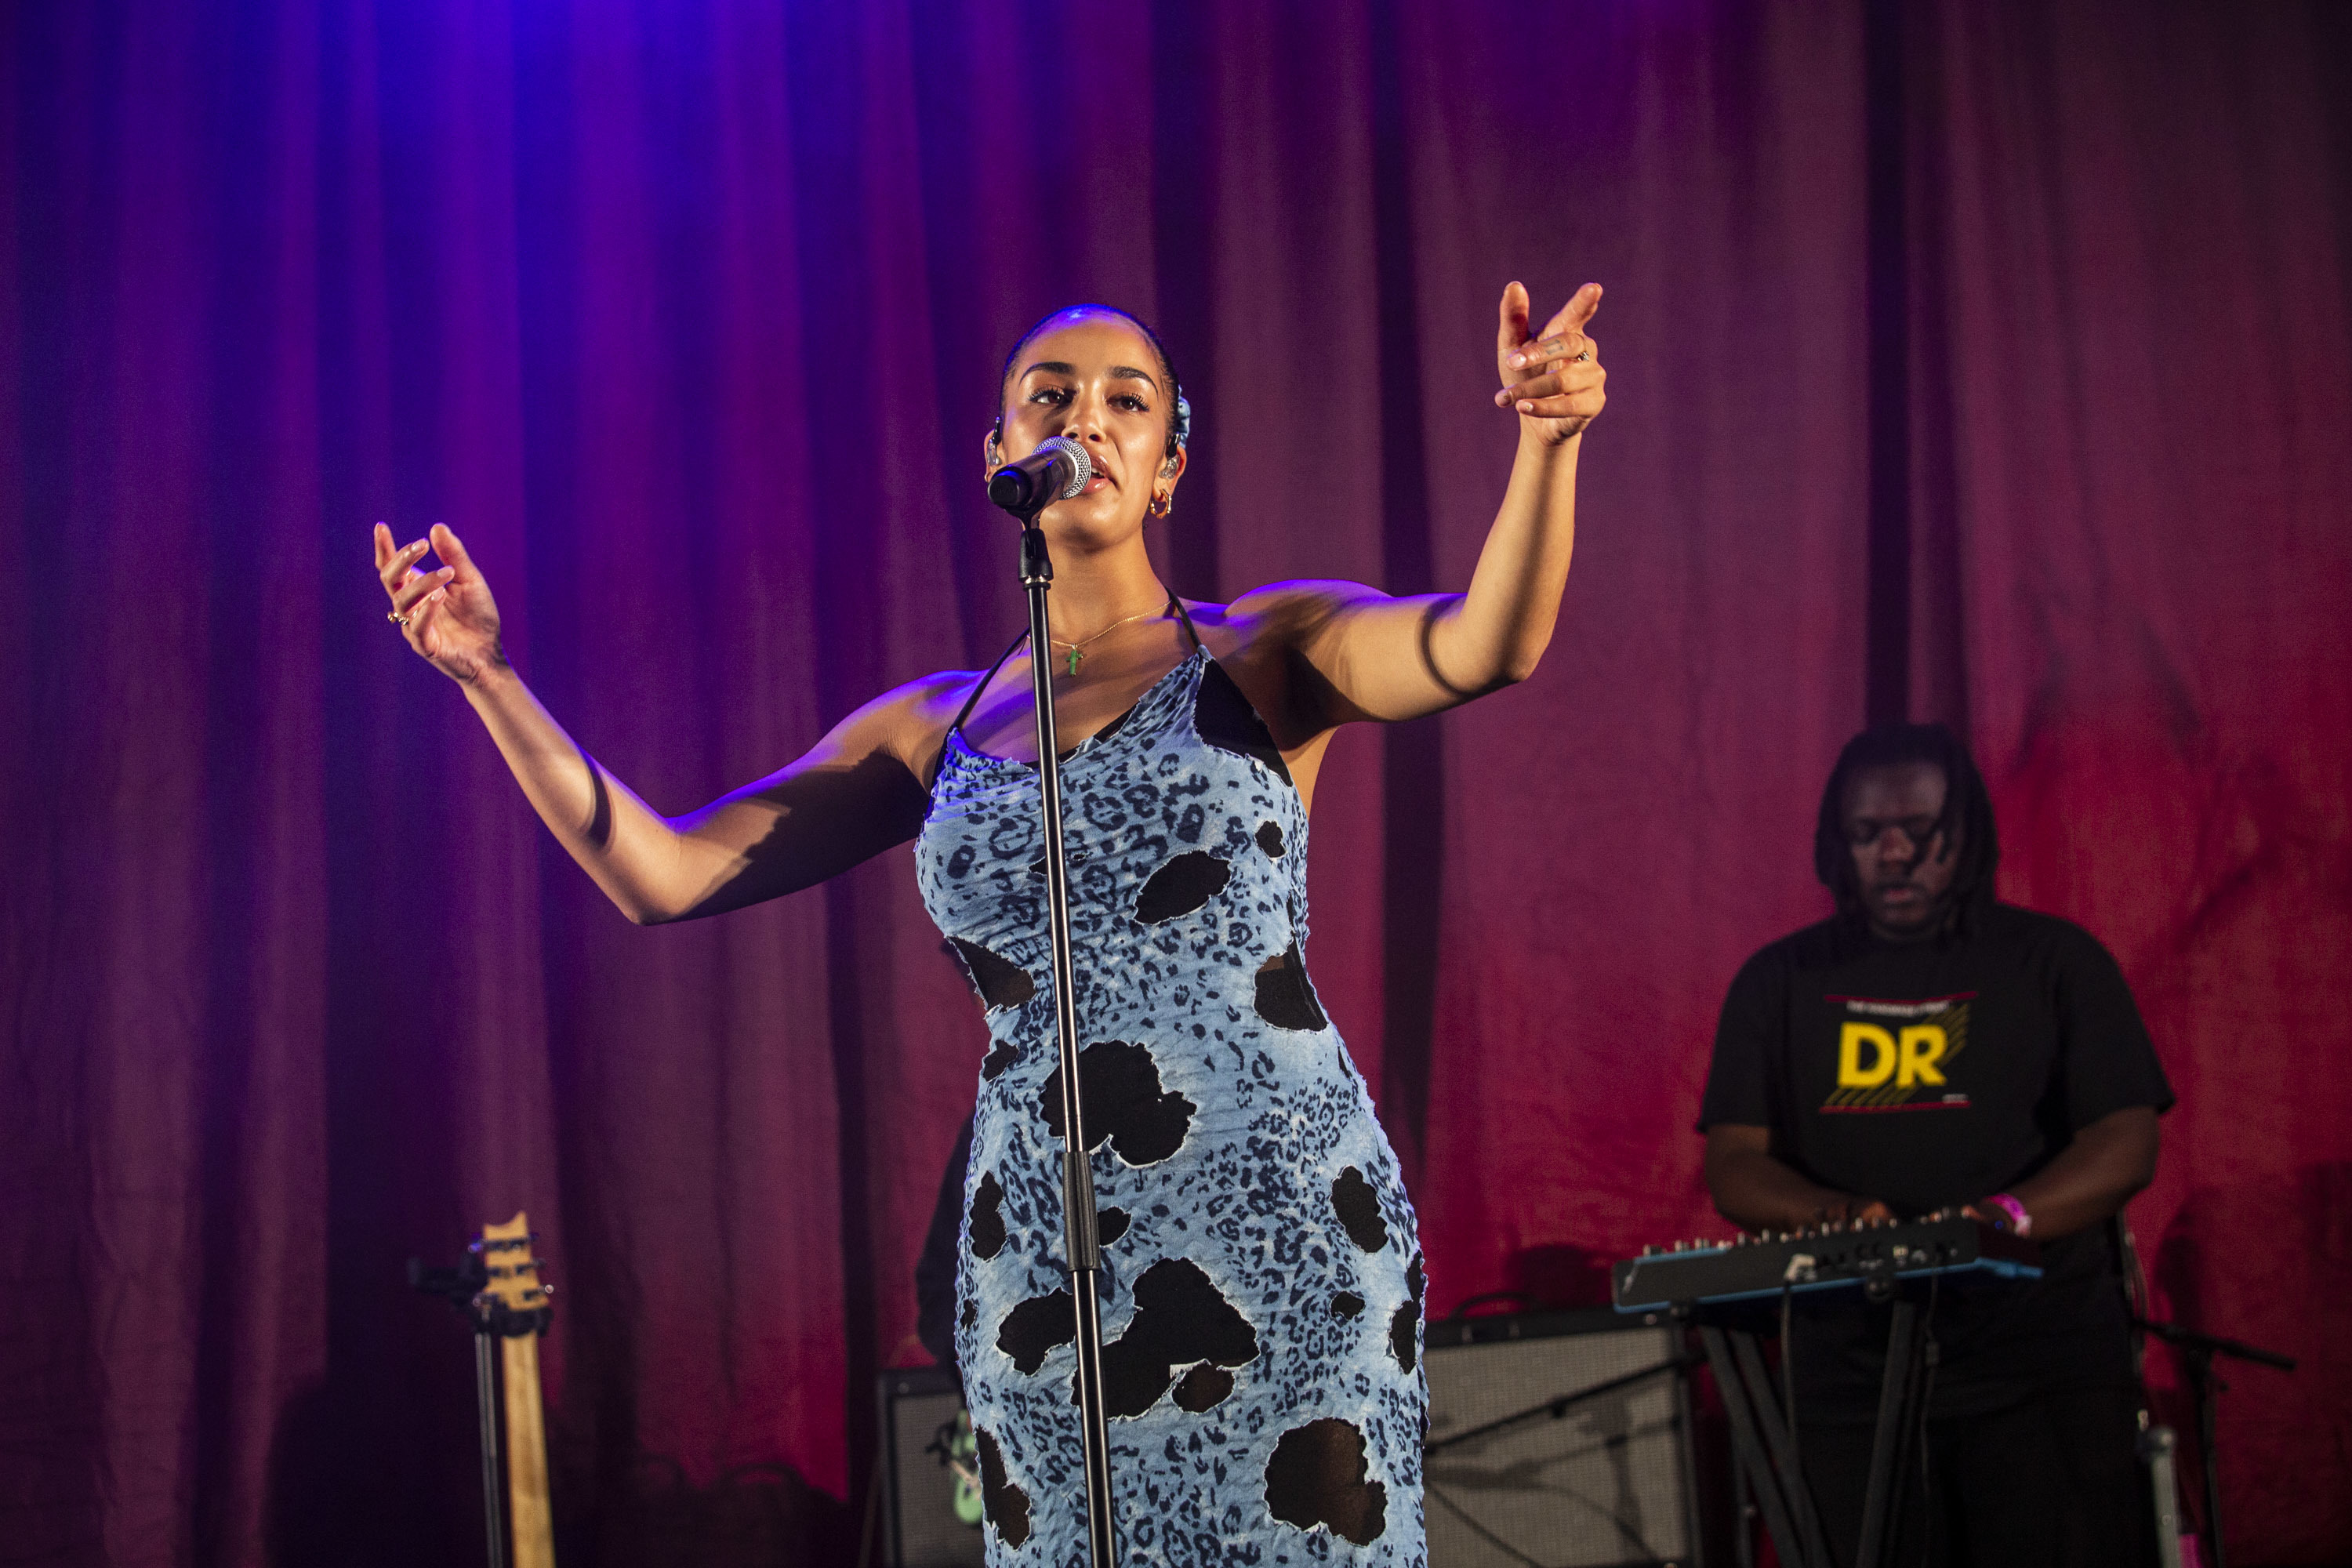 Jorja Smith heads up an eclectic first night of Bestival 2018